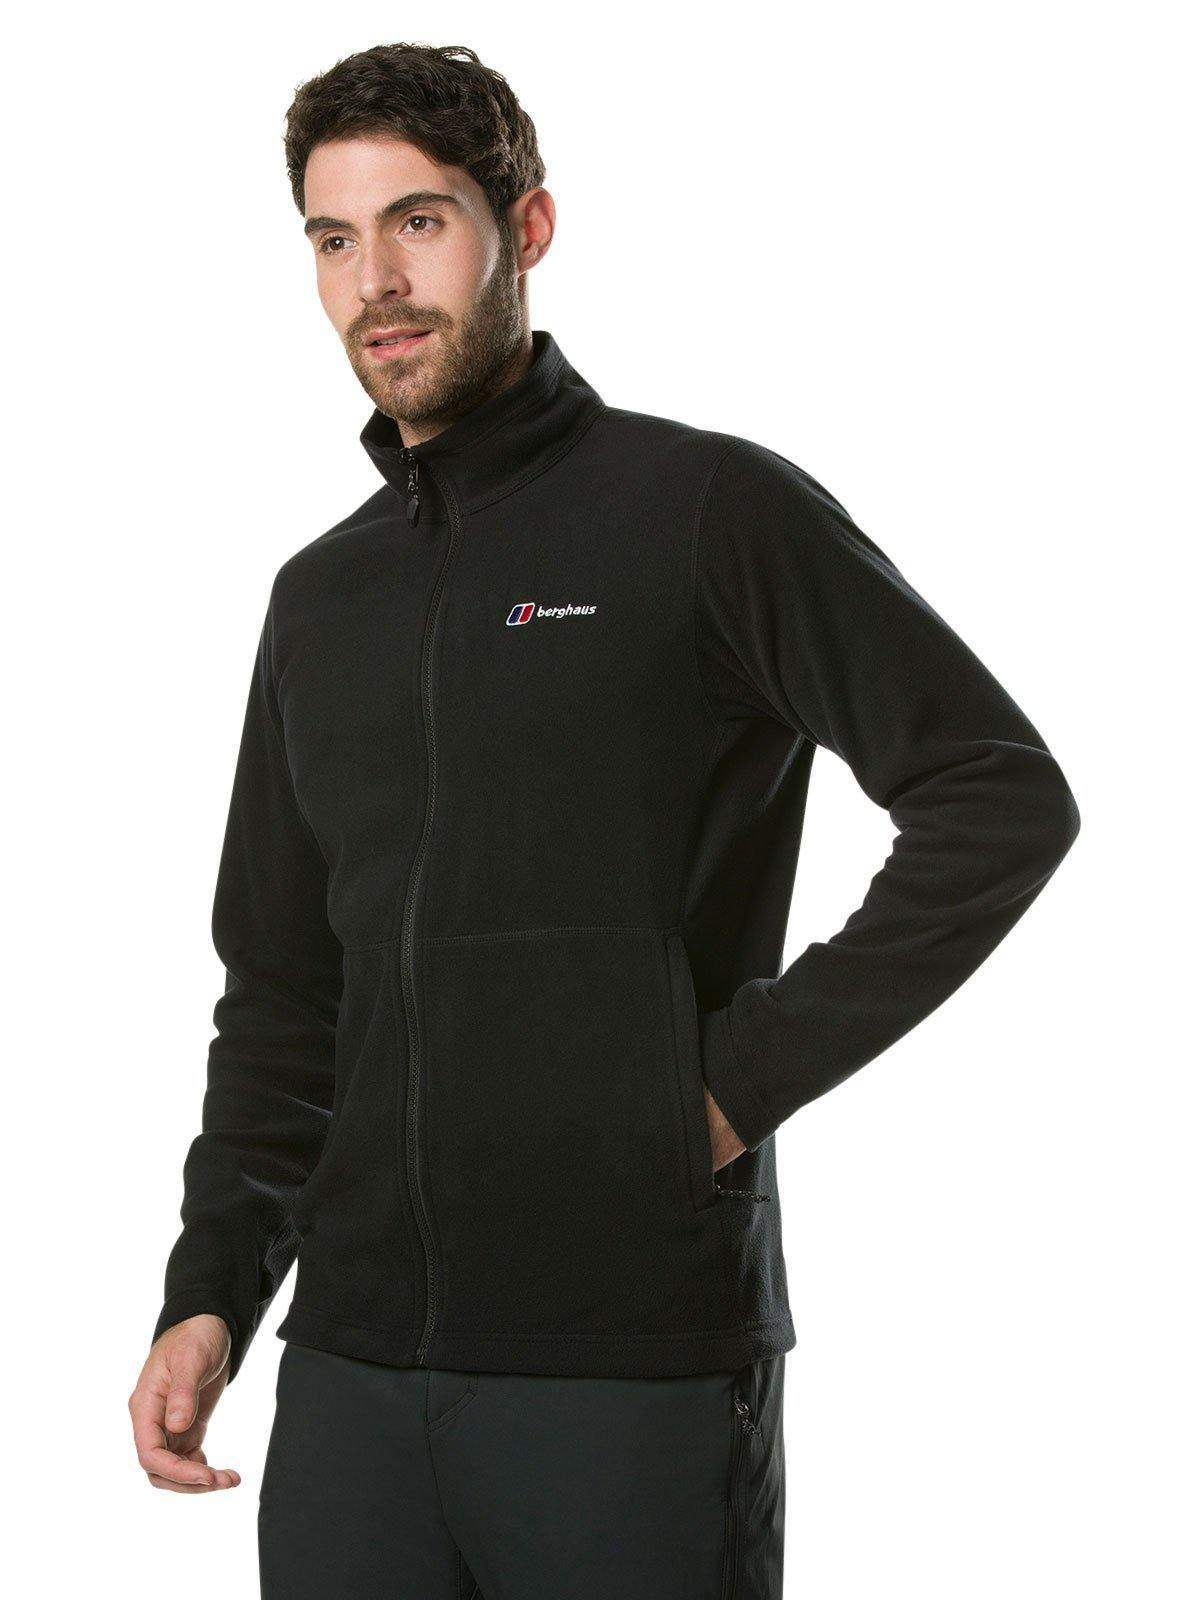 Berghaus Men’s Prism Micro PT IA FL Jkt - The Luxury Promotional Gifts Company Limited